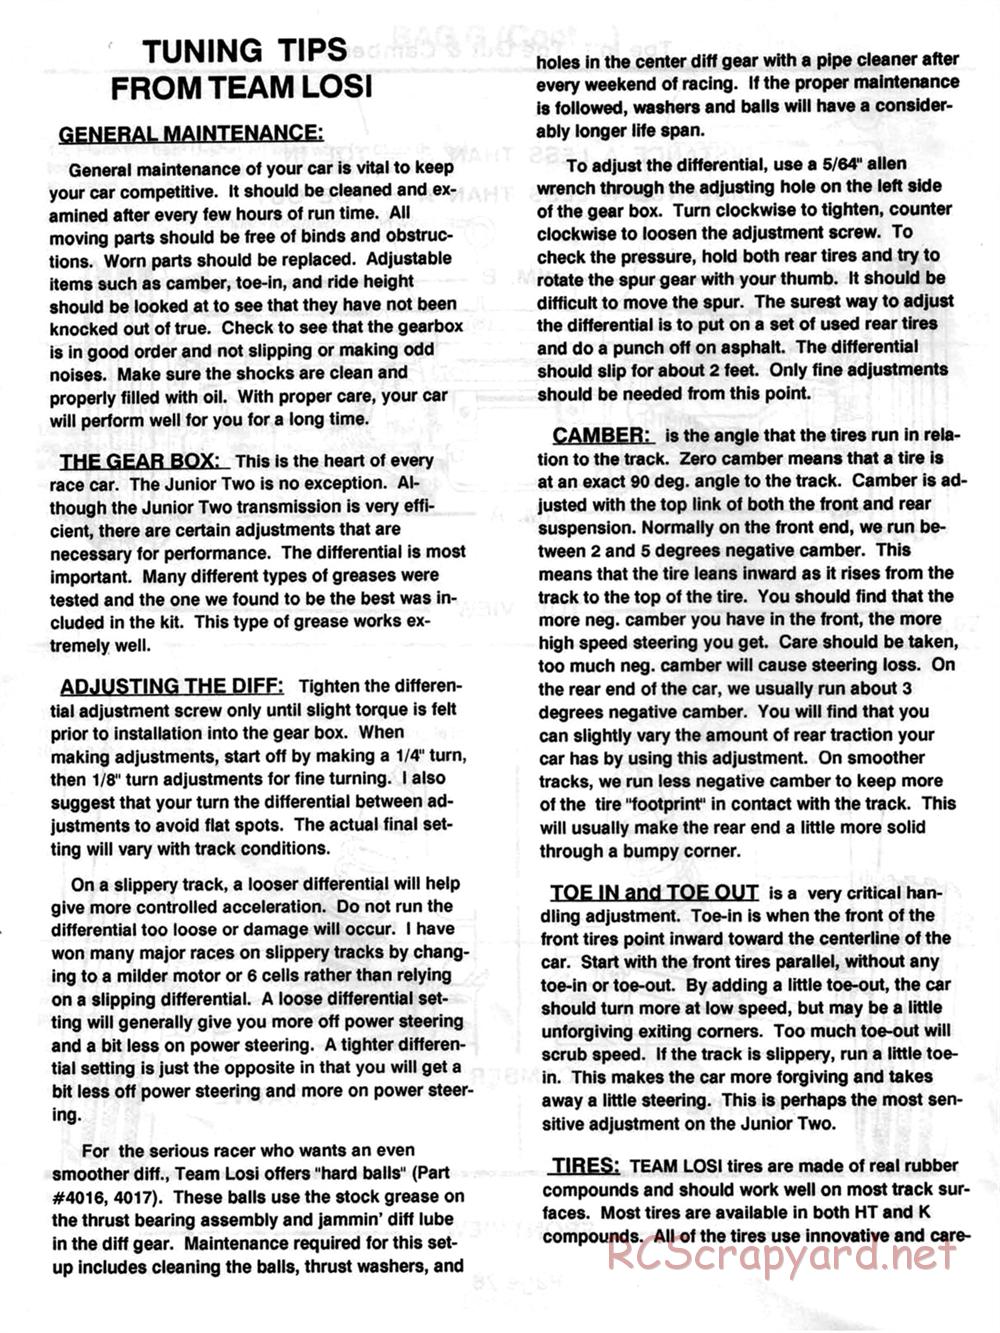 Team Losi - Junior Two - Manual - Page 32